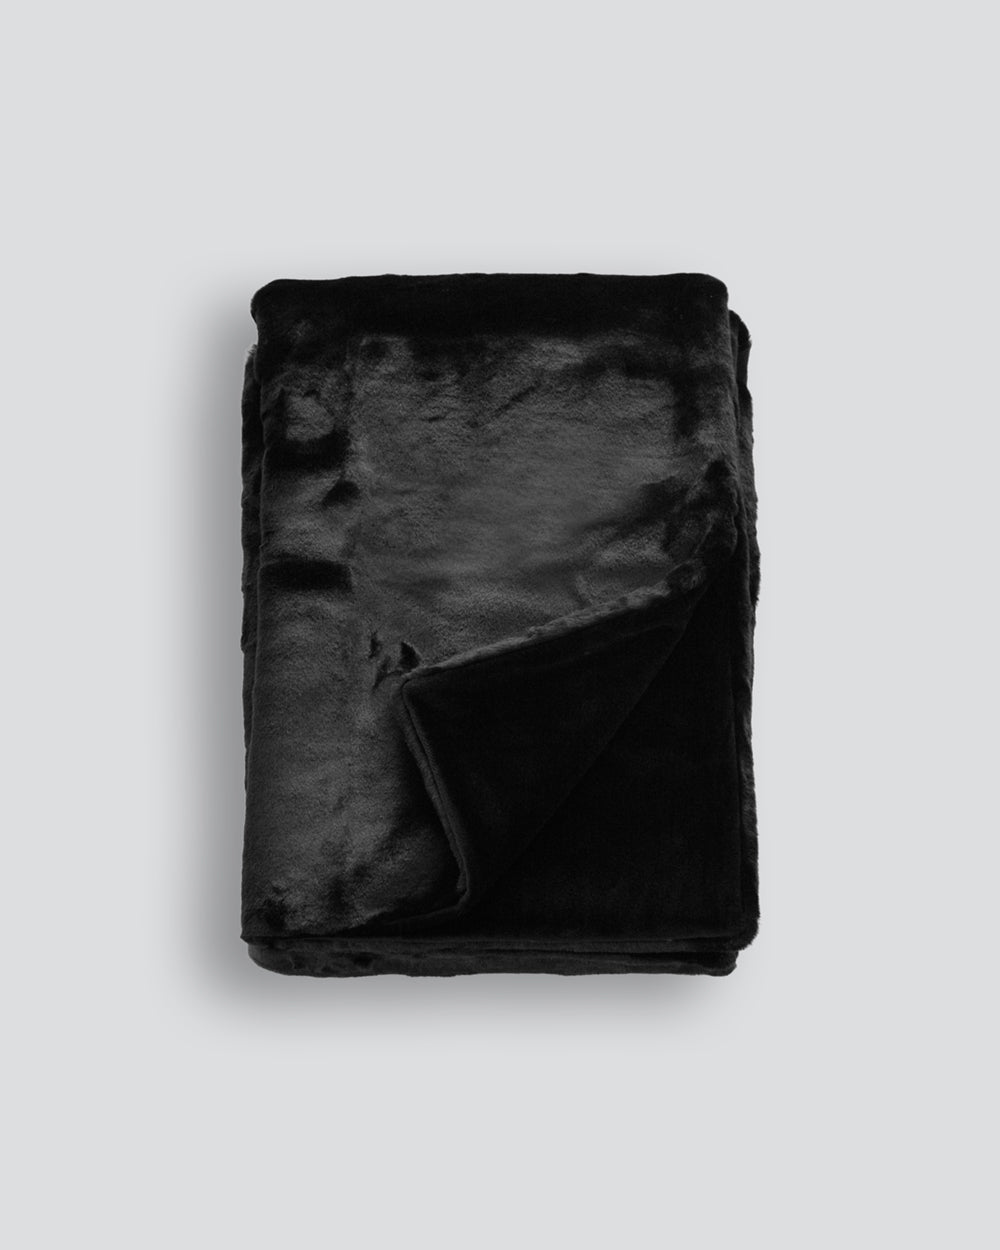 Heirloom Black Panther Throw Rug Blanket in Faux Fur is available from Make Your House A Home Premium Stockist. Furniture Store Bendigo, Victoria. Australia Wide Delivery.